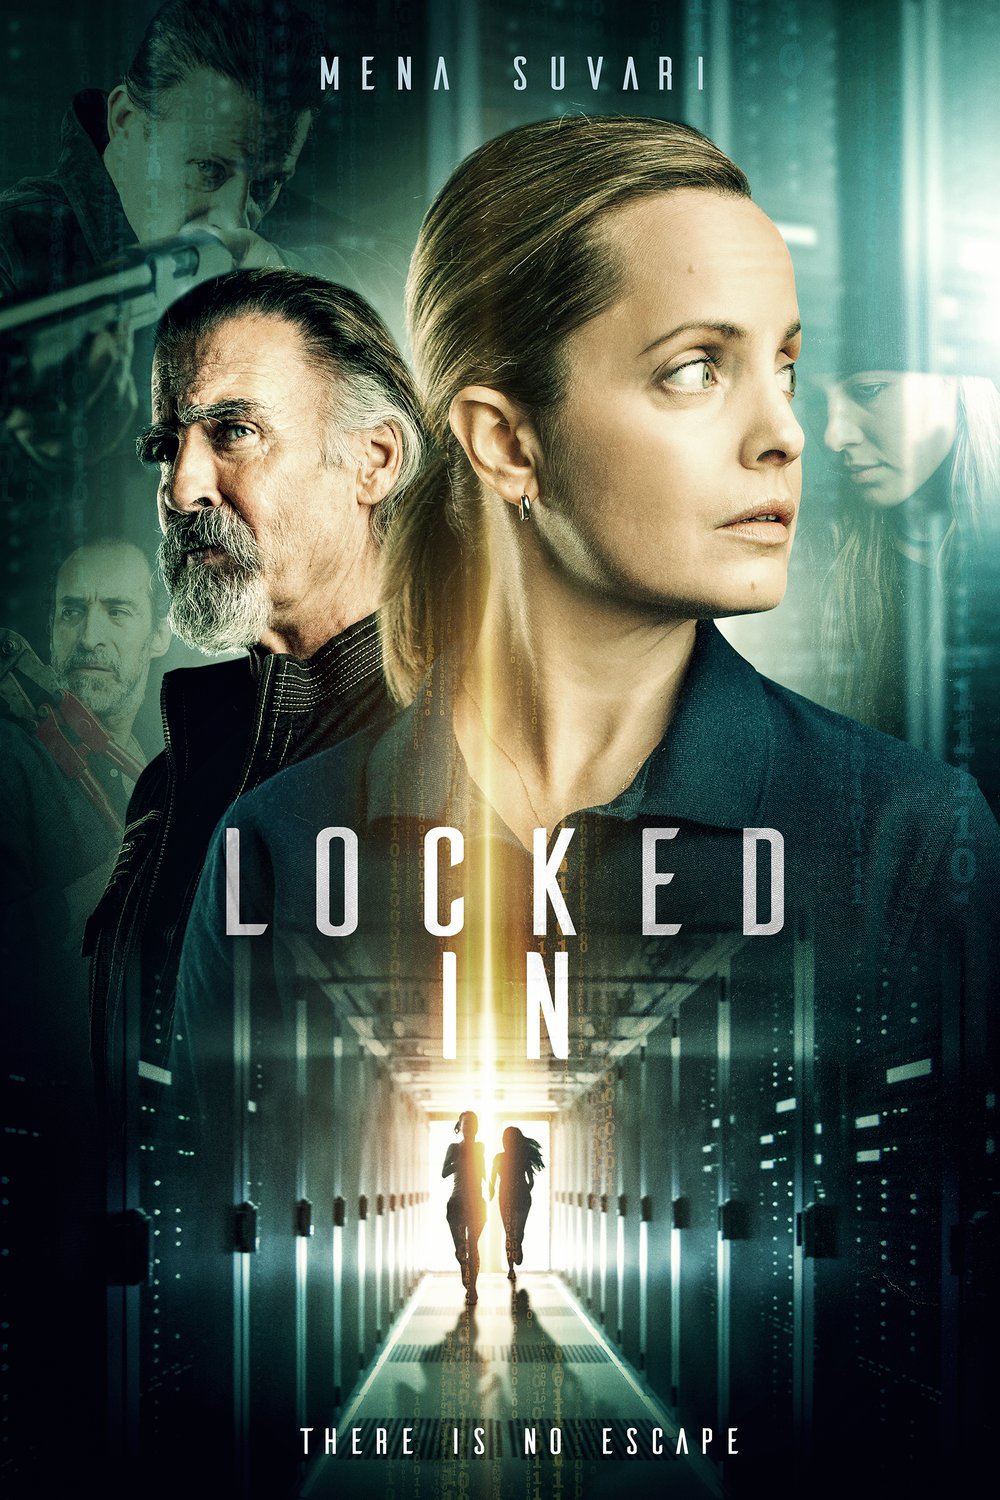 Poster of the movie Locked in